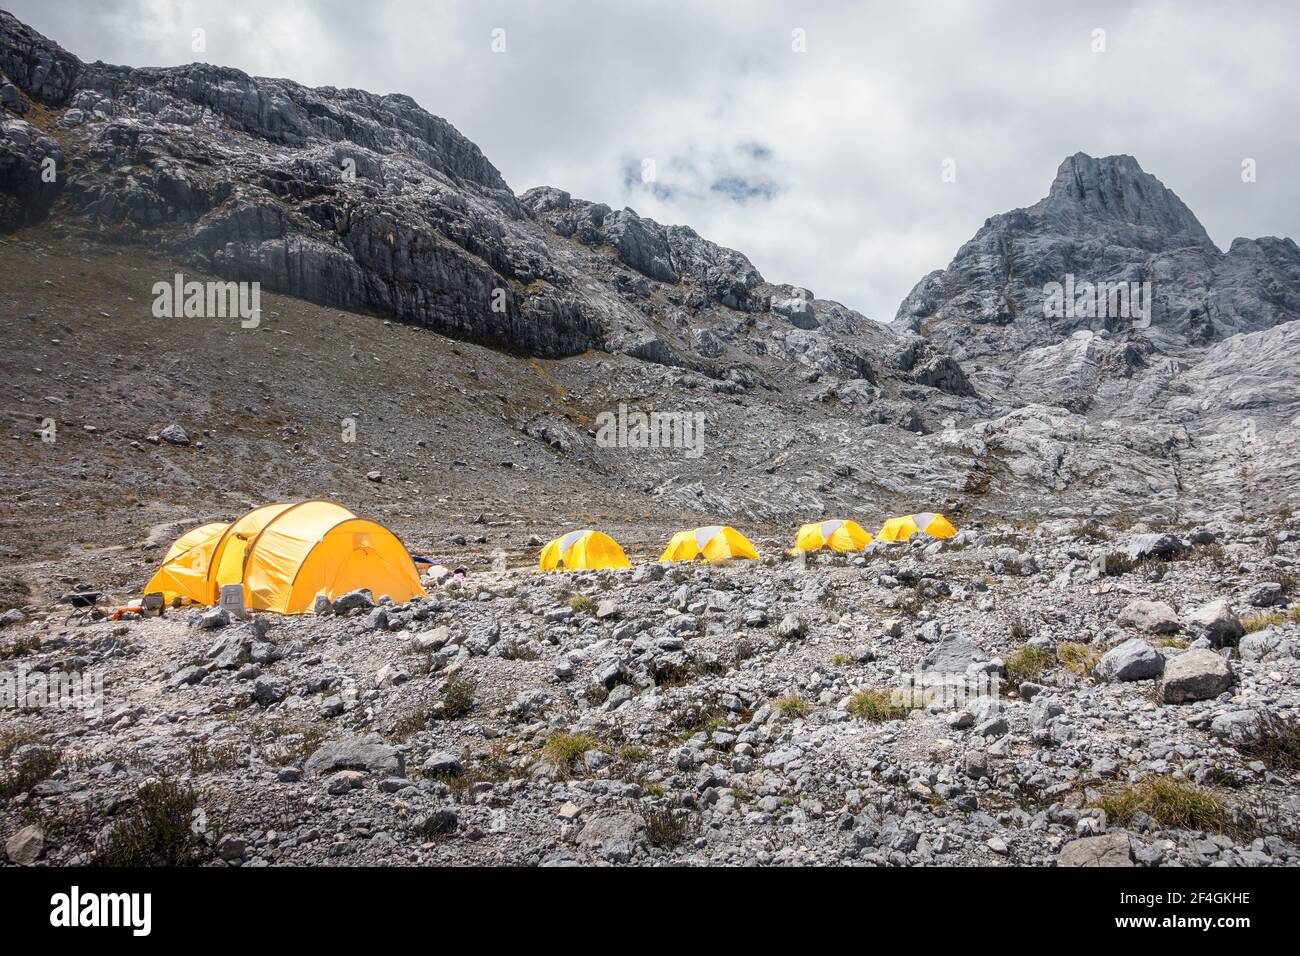 Camping tents in the Carstensz Pyramid (Puncak Jaya) high-altitude base camp during the mountaineering expedition to one of the Seven Summits Stock Photo